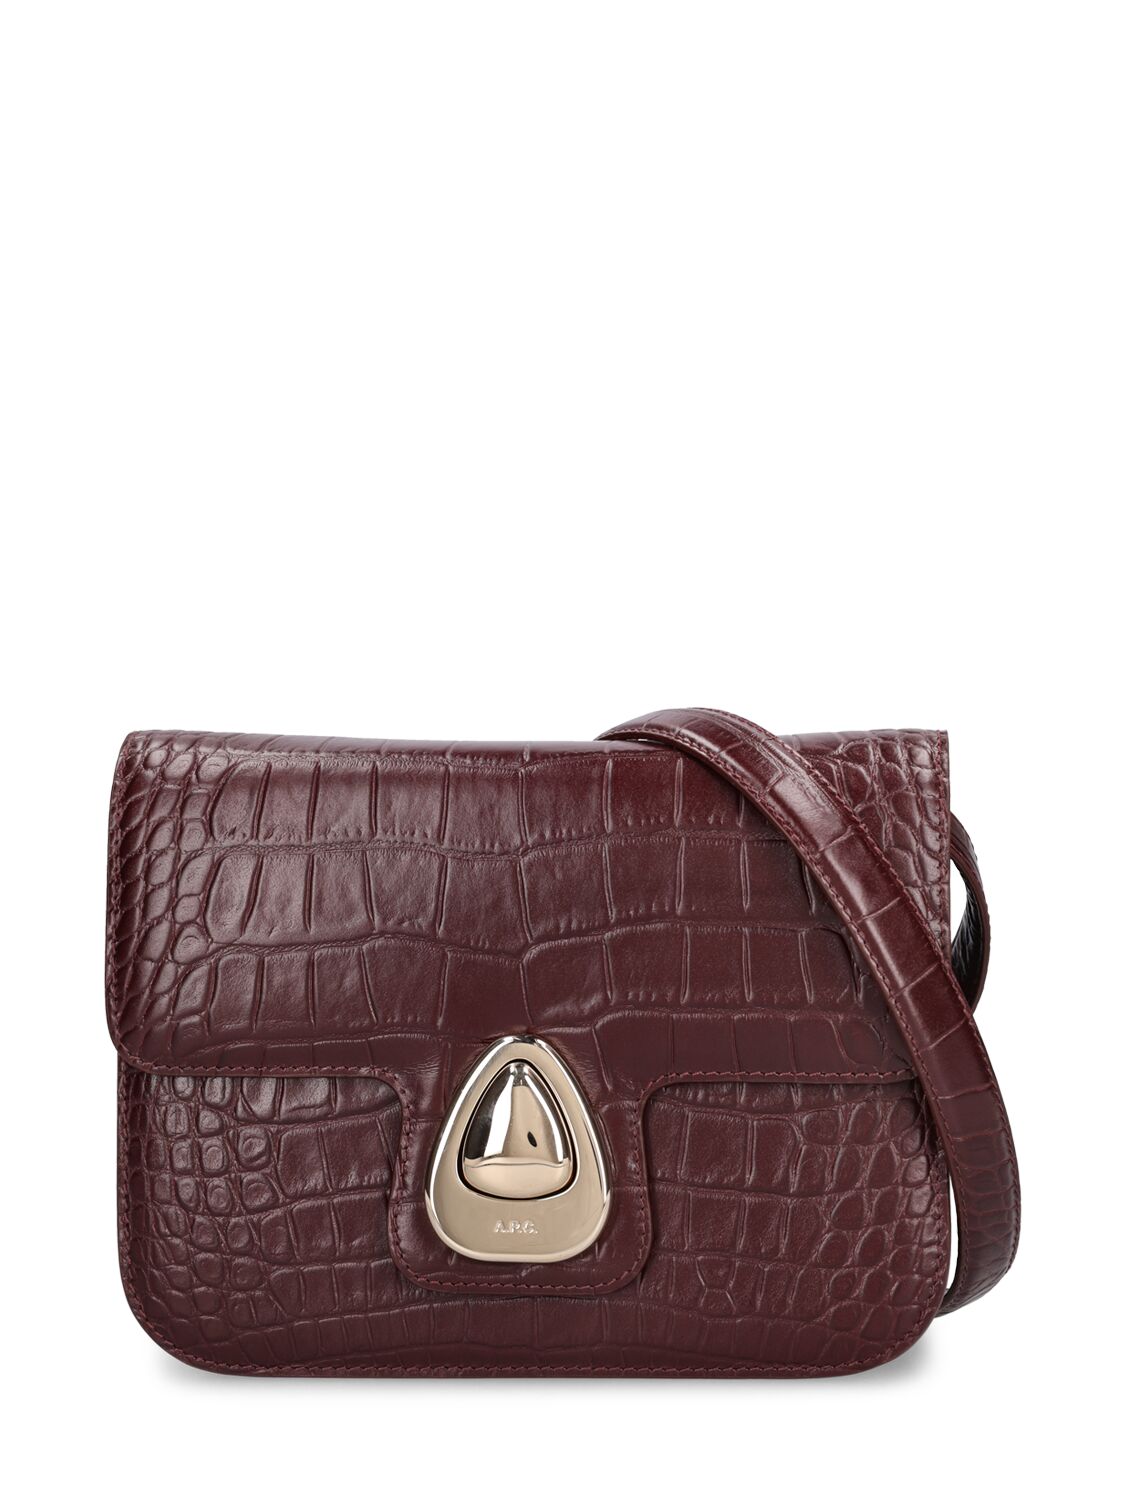 Image of Small Astra Croc Embossed Leather Bag